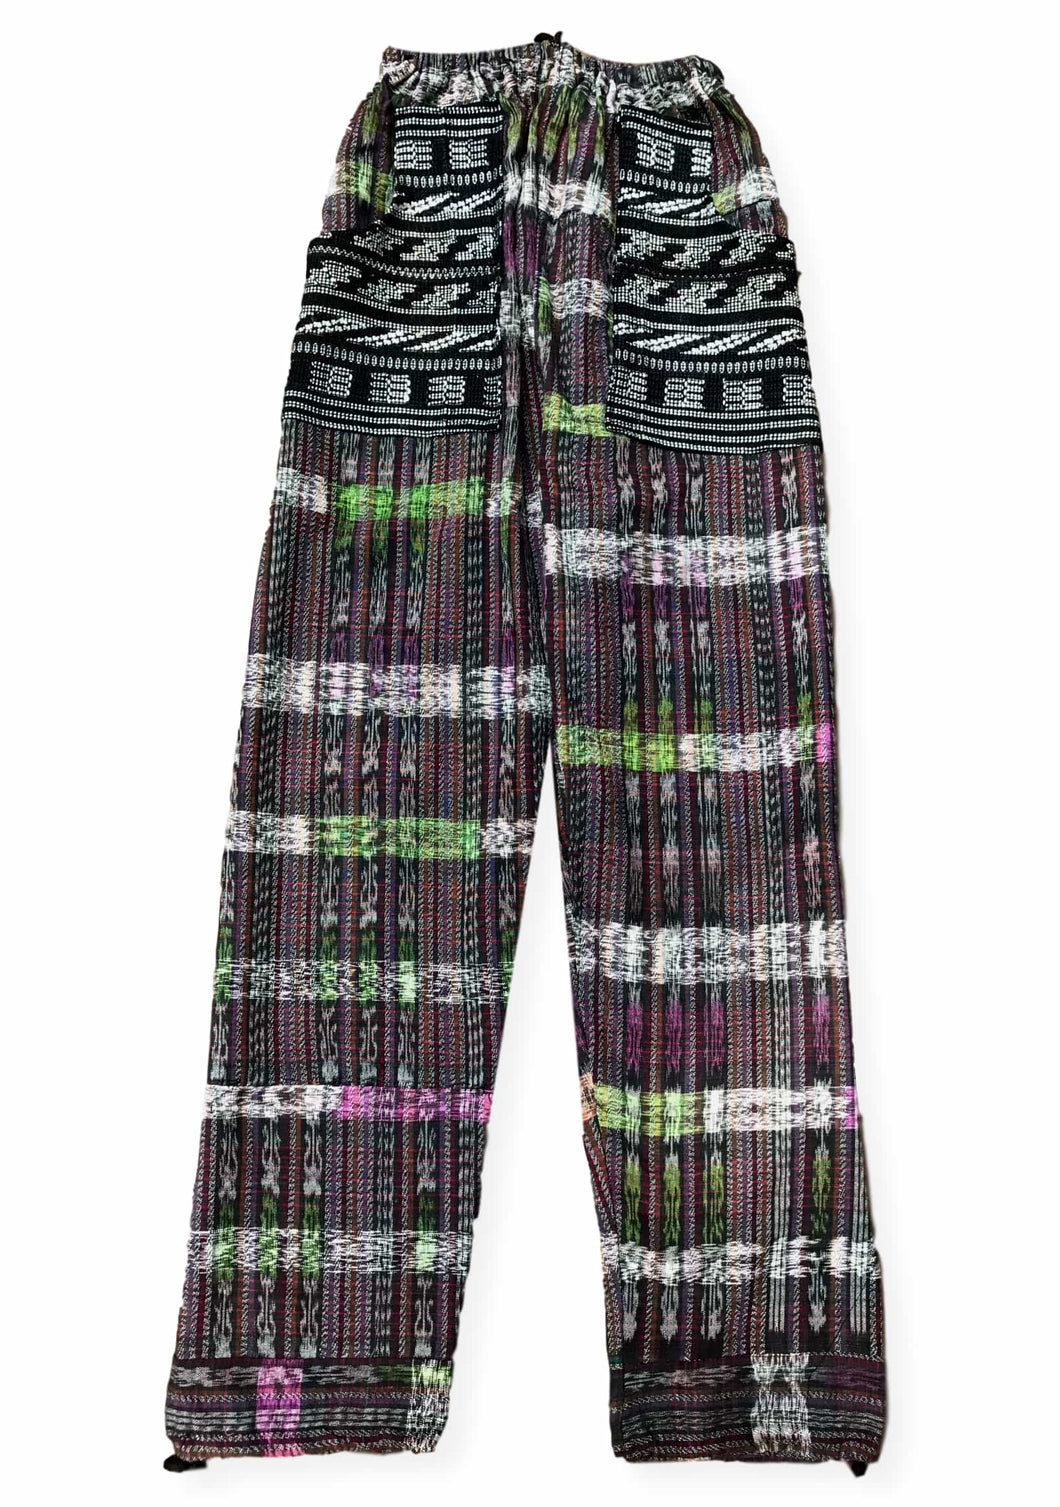 Guatemalan Corte Style Pants with Huipil Pockets - Black & Multicolored - Fair Trade Gypsy